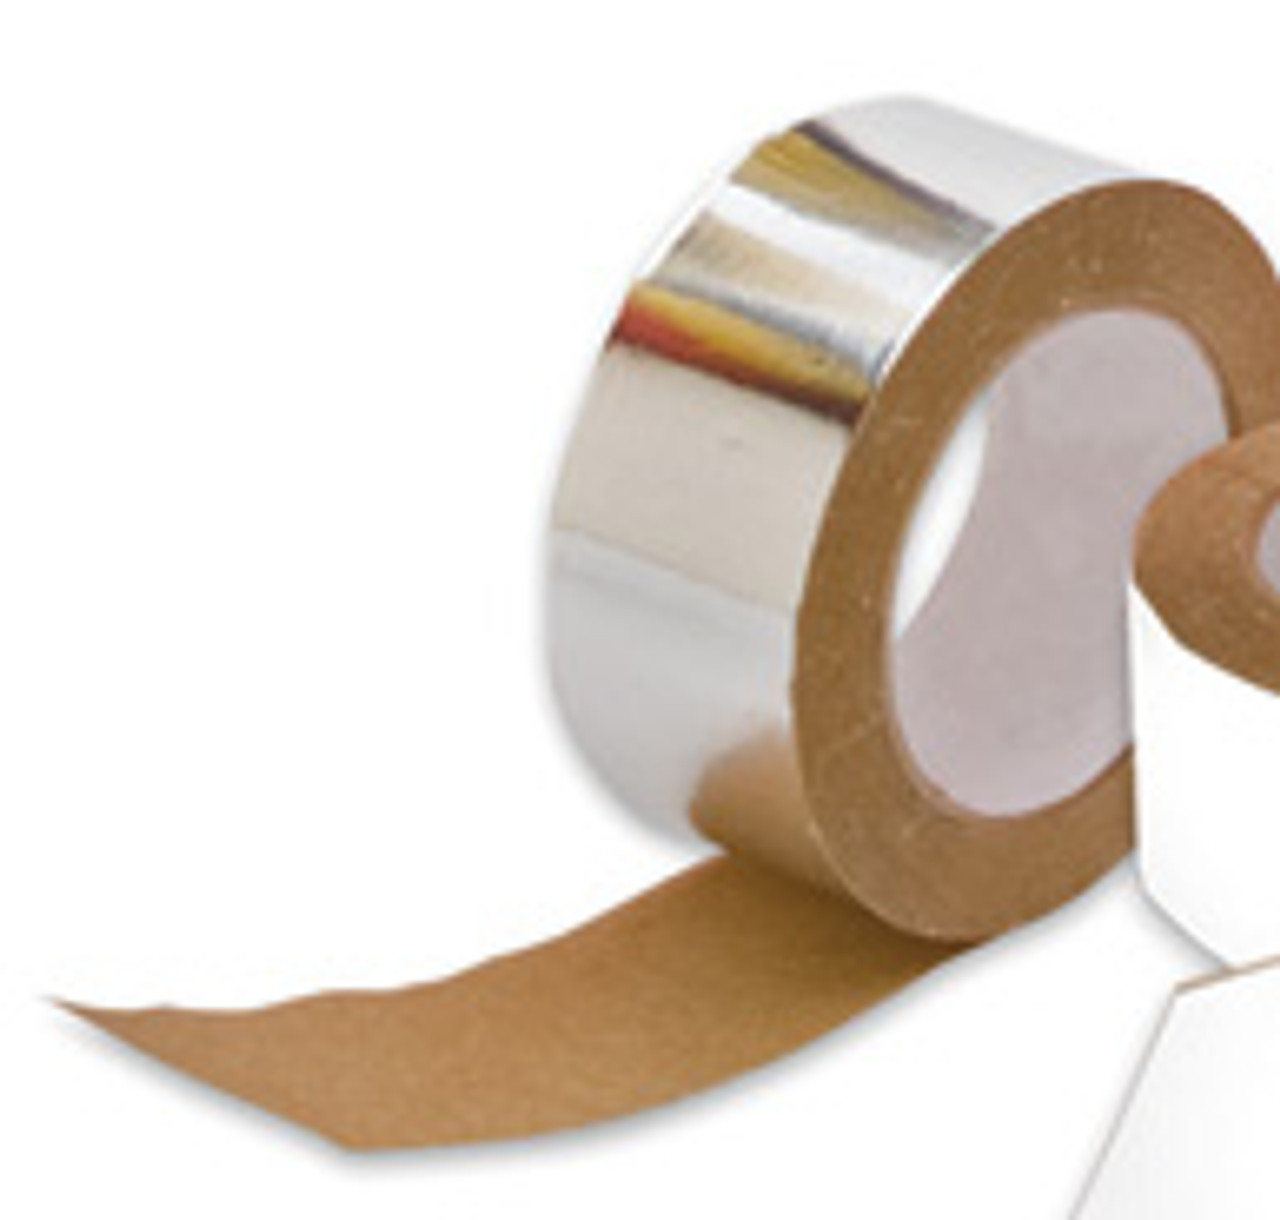 Thermax Foil Tape (Silver) for Thermax Poly Iso Sheathing